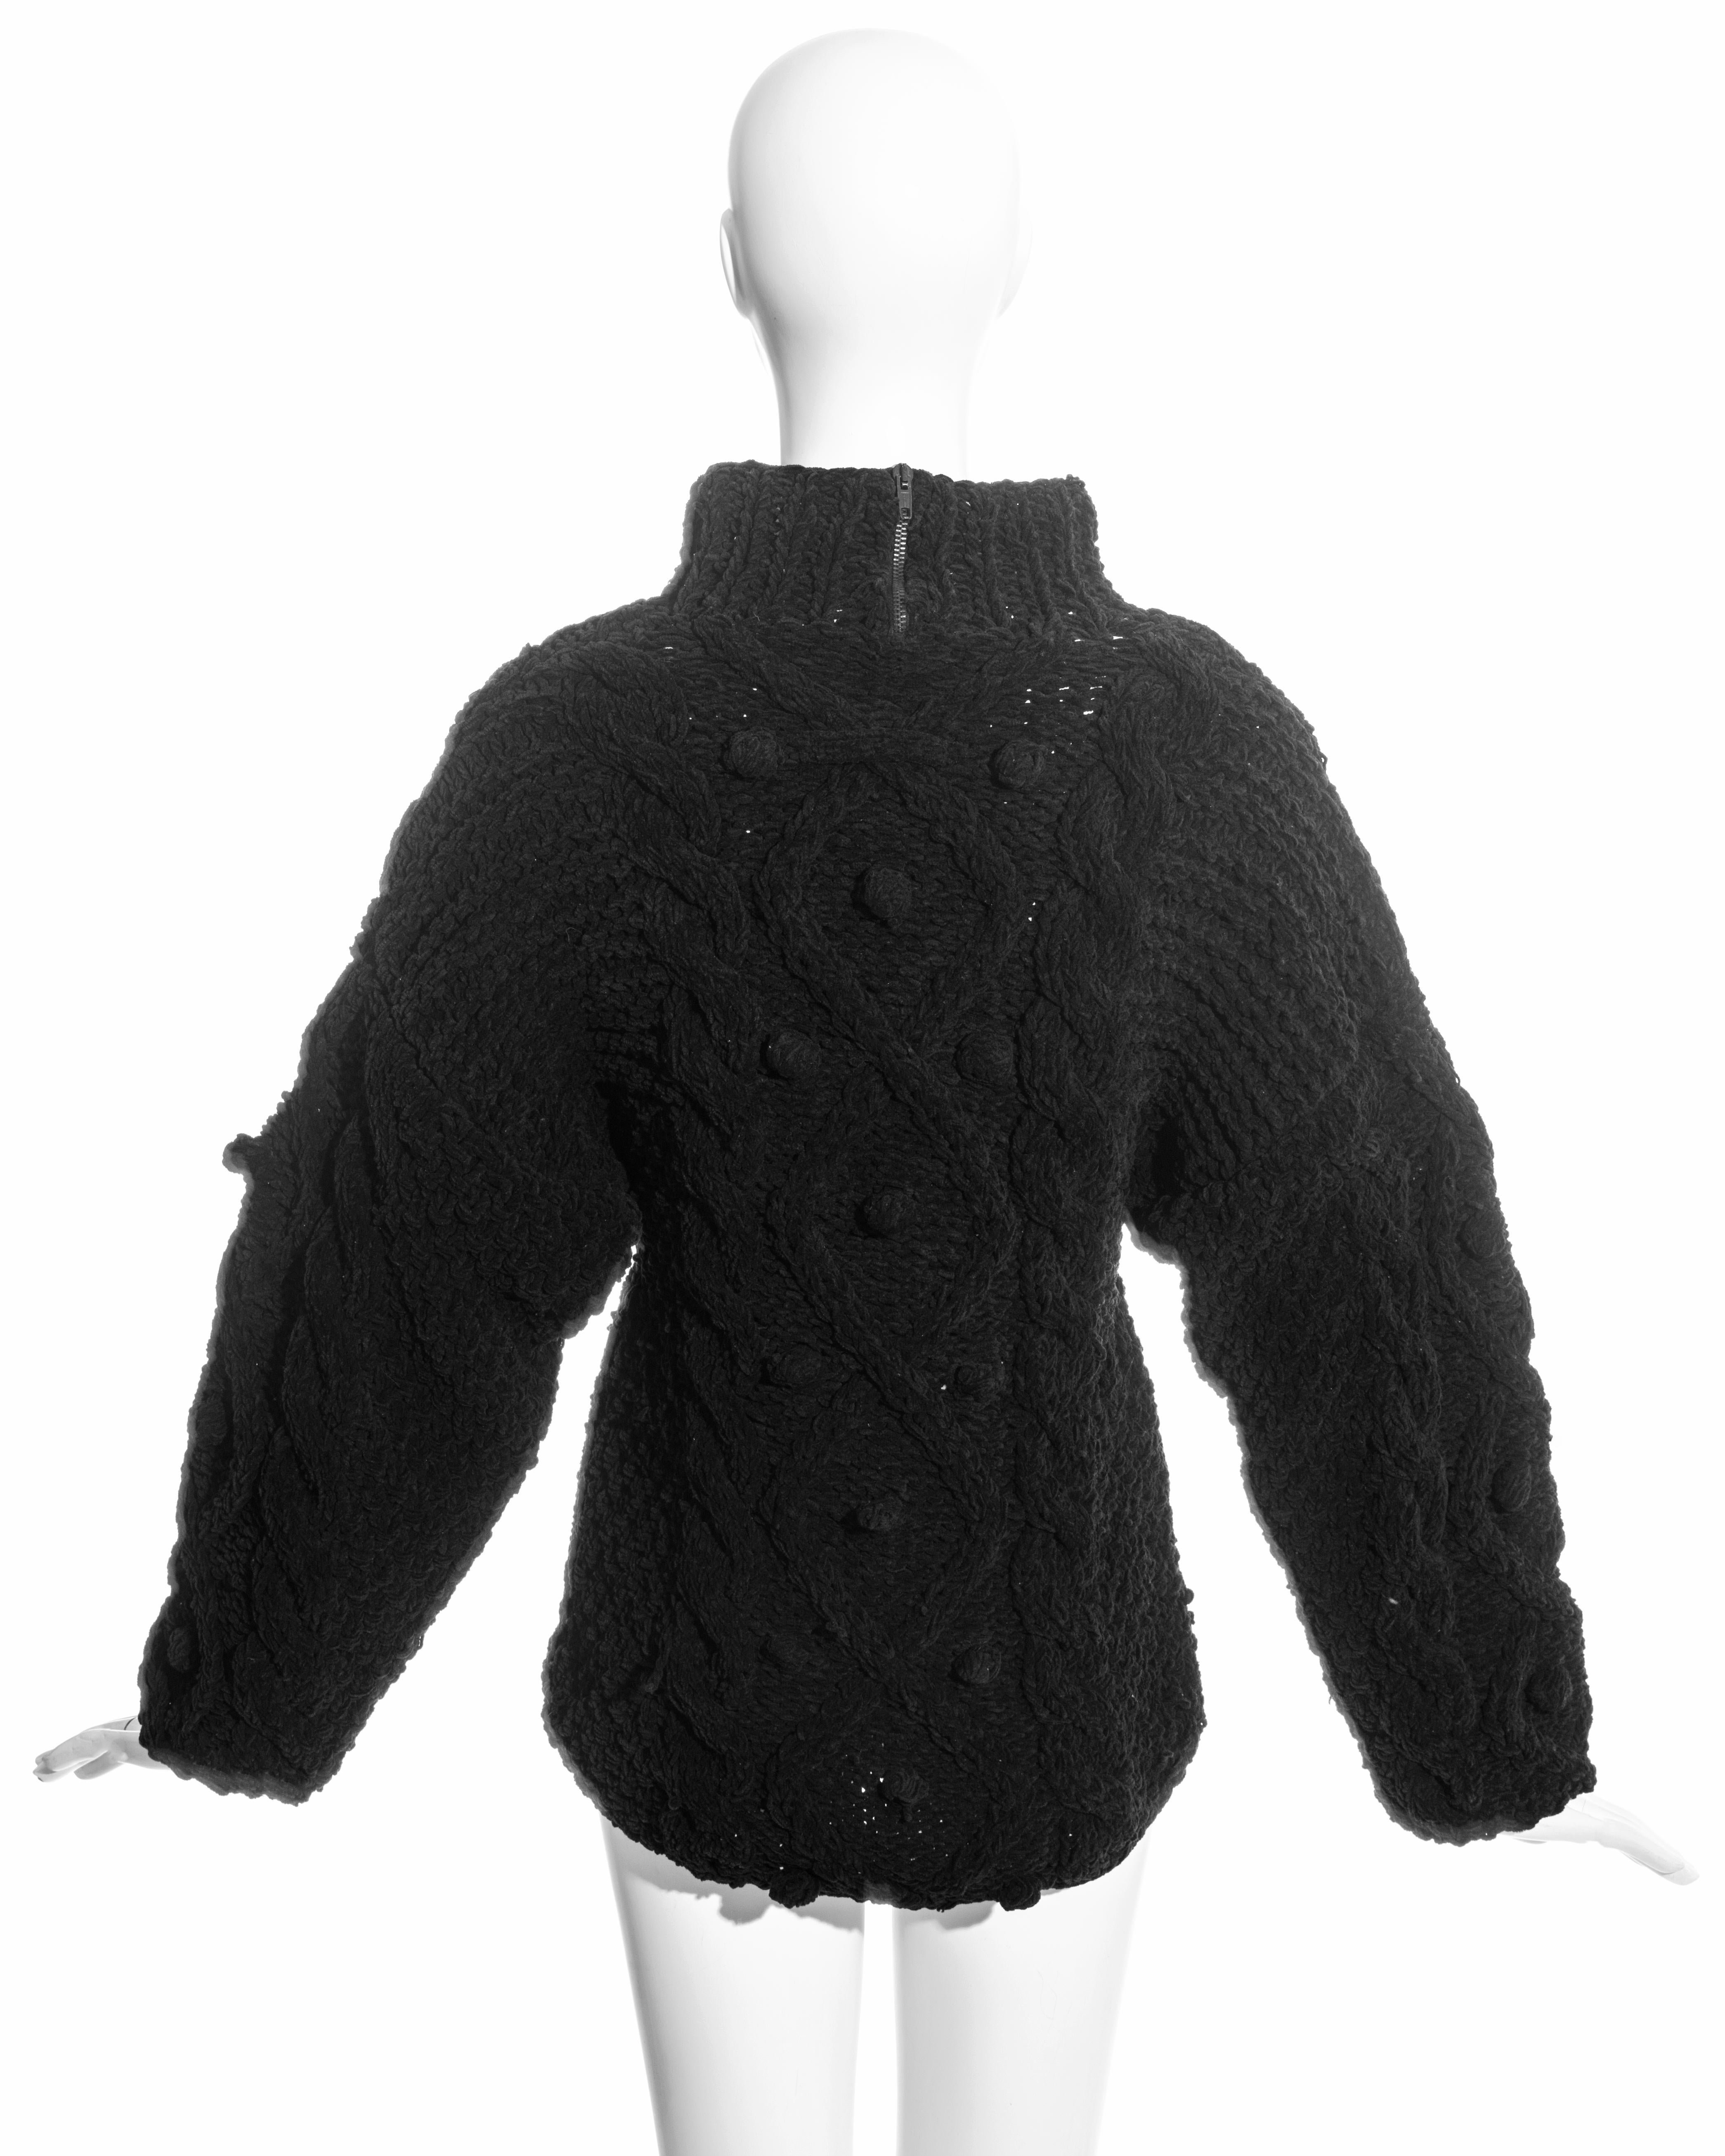 Jean Paul Gaultier black knitted chenille aran conical breast sweater, fw 1985 For Sale 4